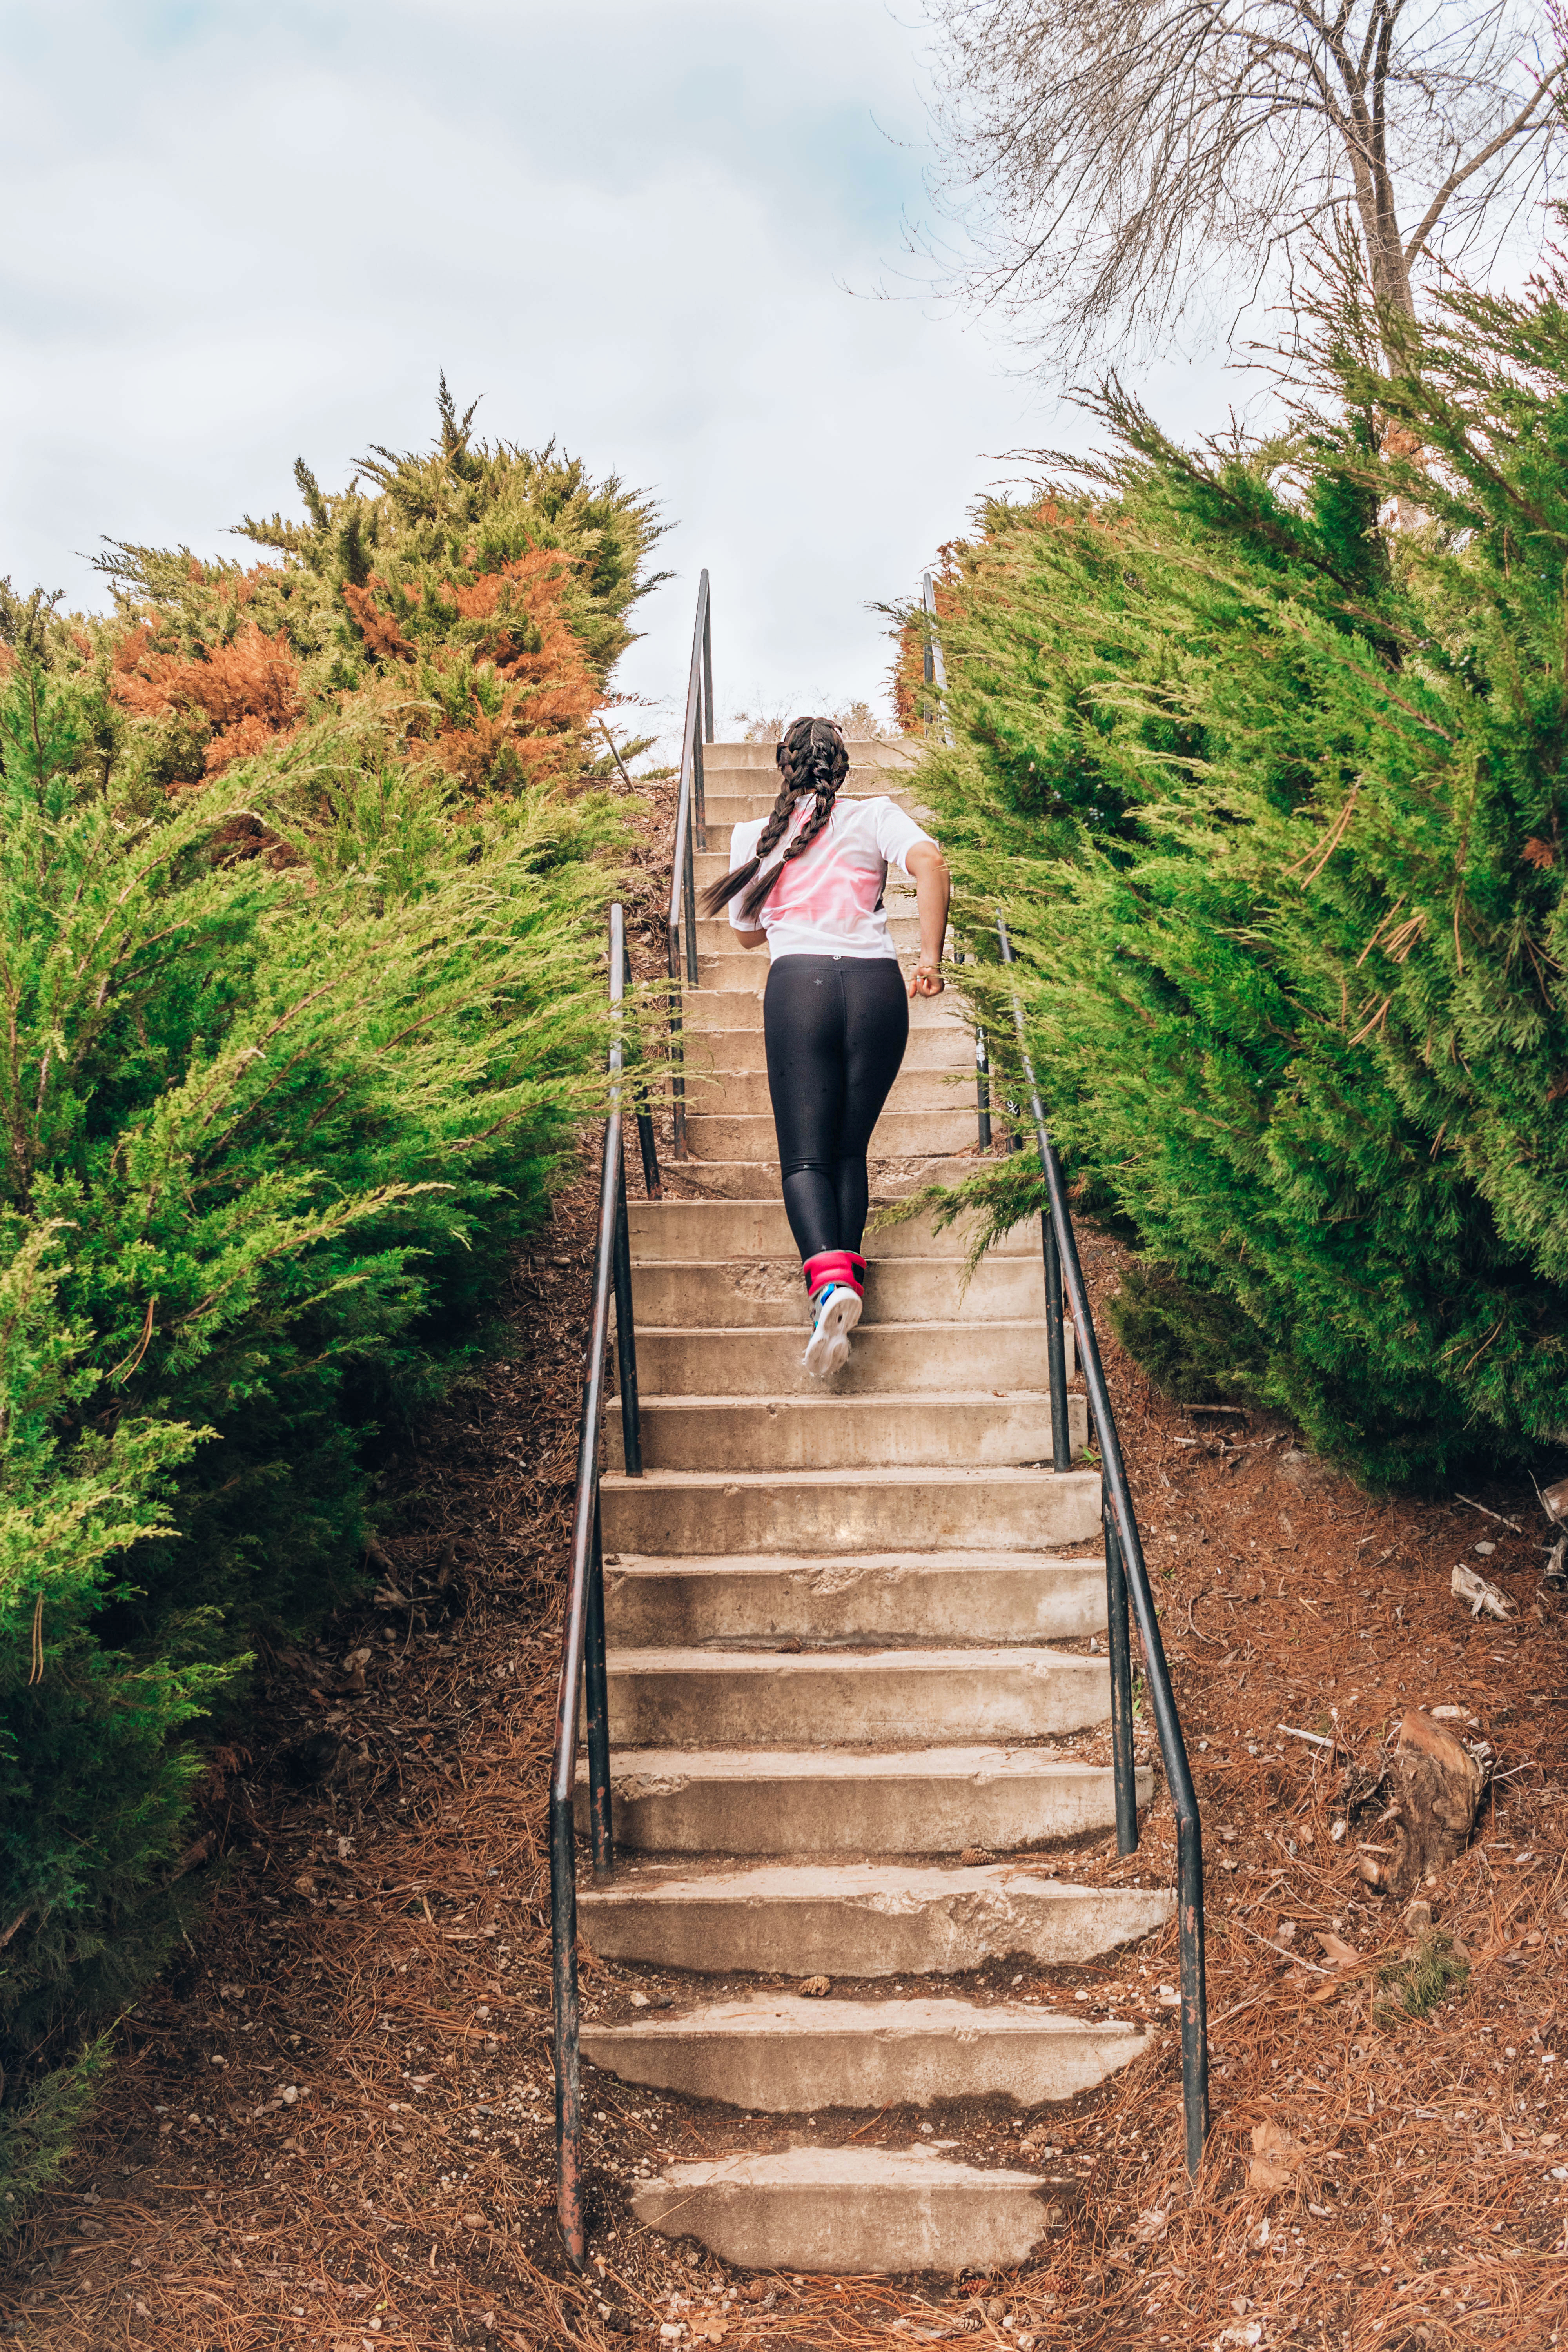 Lauryn Hock running up concrete stairs in a park surrounded by ferns